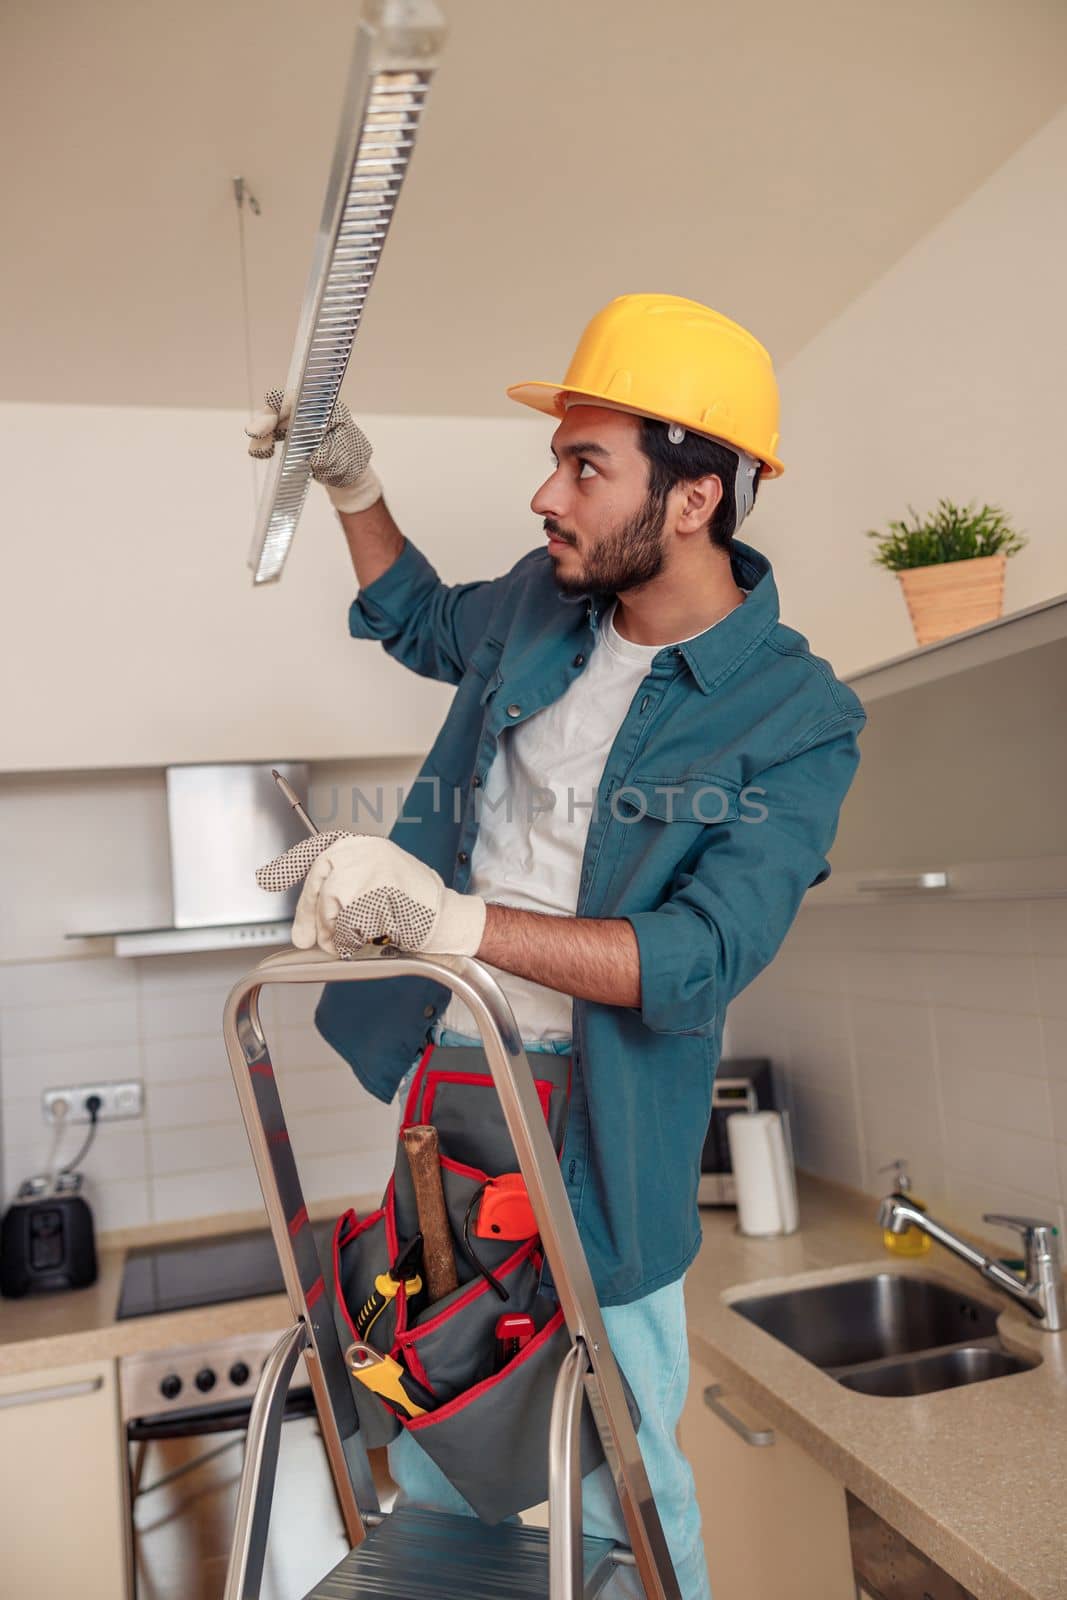 Electrician worker is installing electric lamps light in kitchen. Construction decoration concept